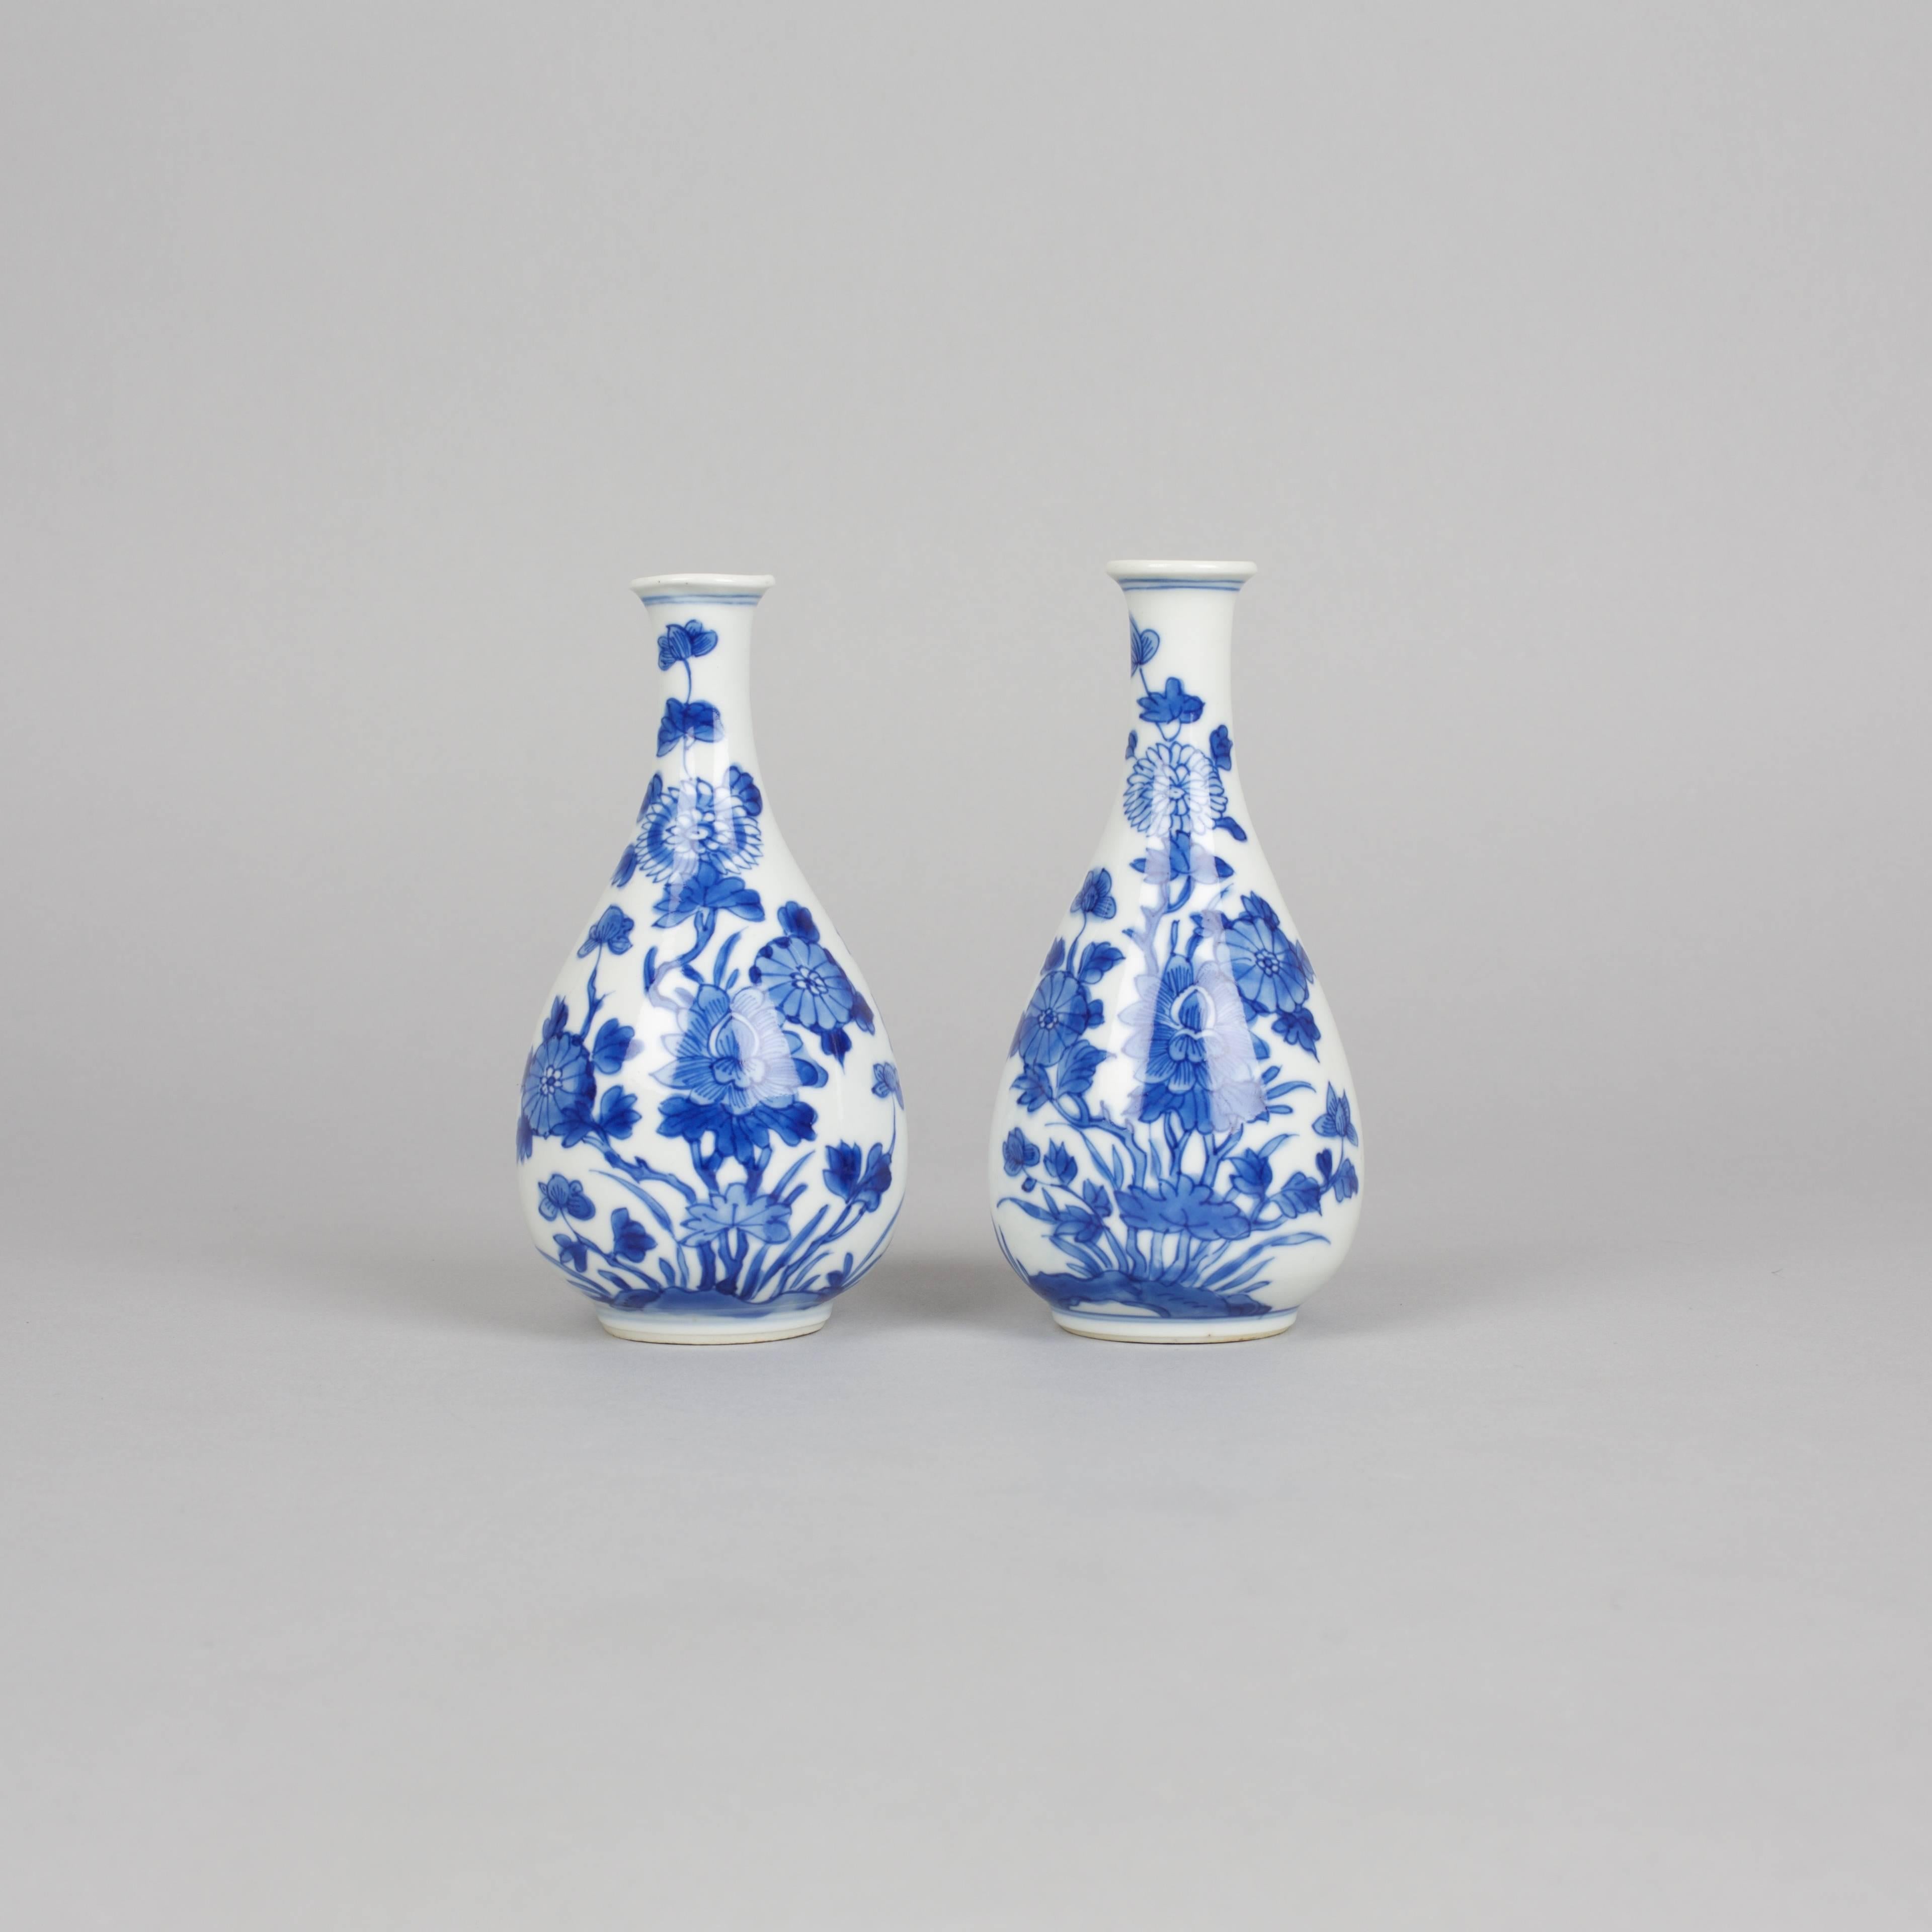 A pair of Chinese porcelain underglazed blue and white miniature bottle vases painted on either side with flowerheads emanating from foliage on the ground, all between double rings at the foot rim.
13.2 cm high, 6.5 cm width, 4cm foot